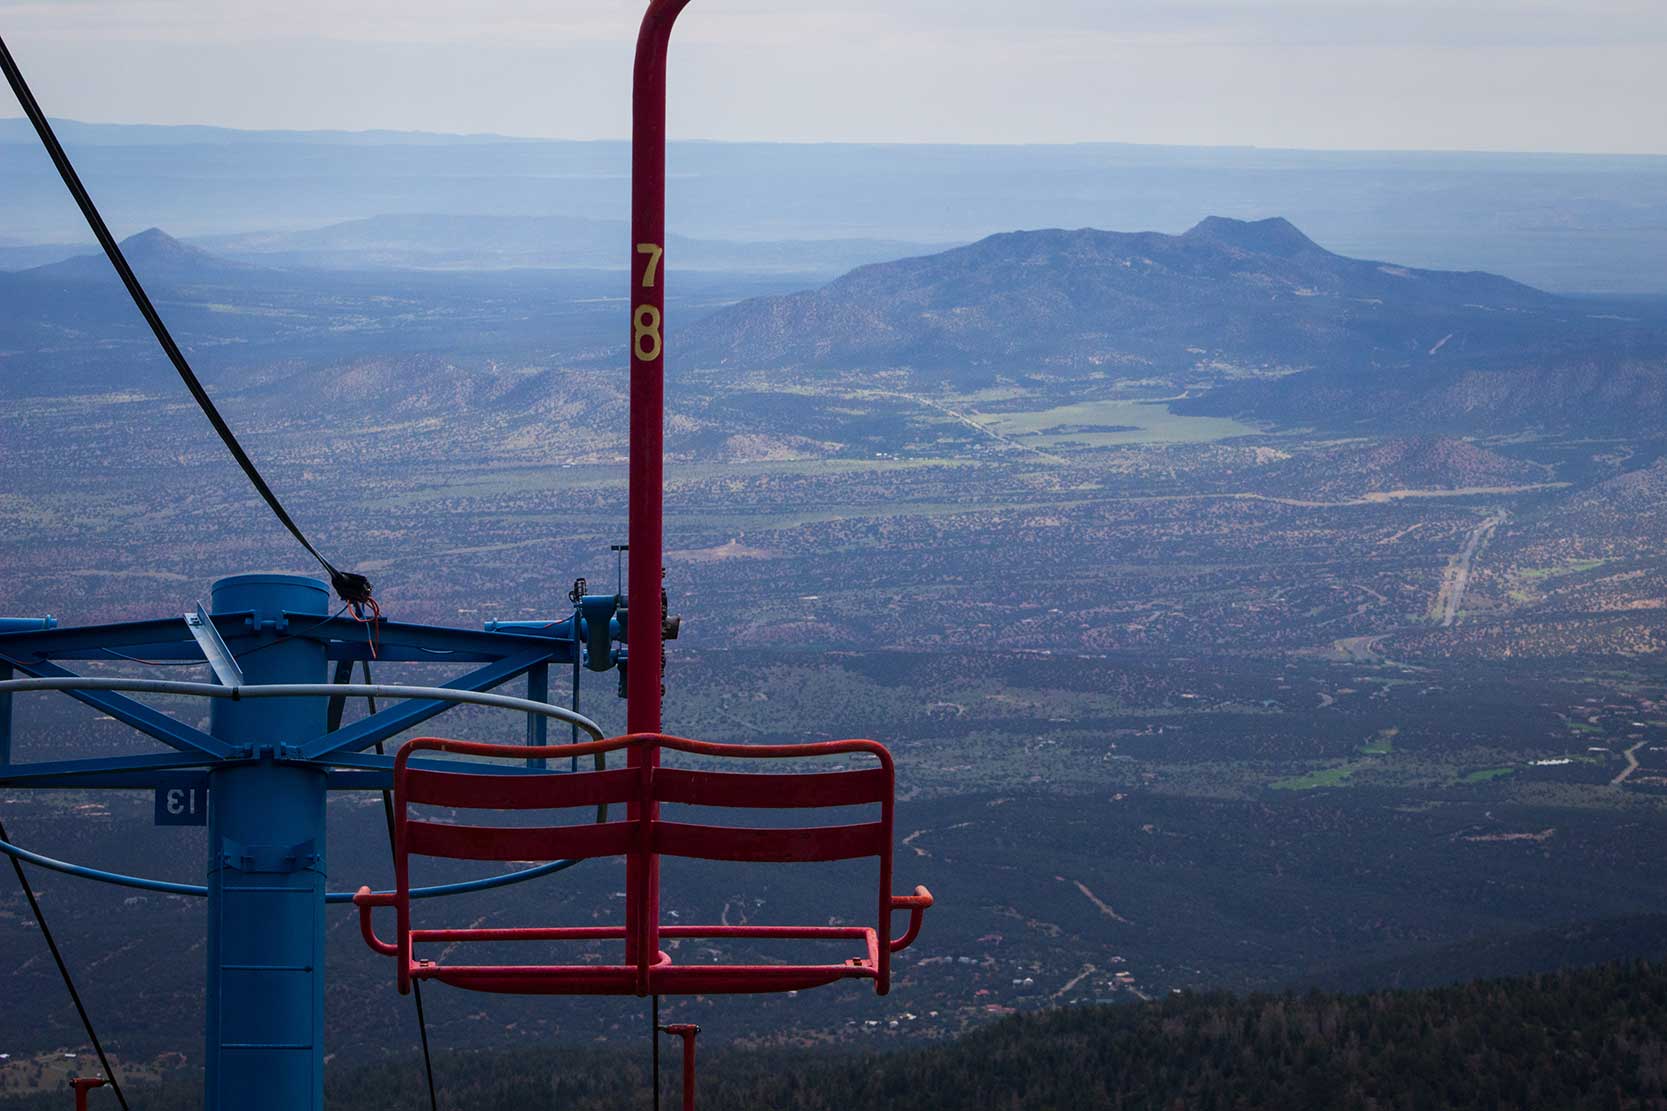 A chairlift sits still on the side of a mountain